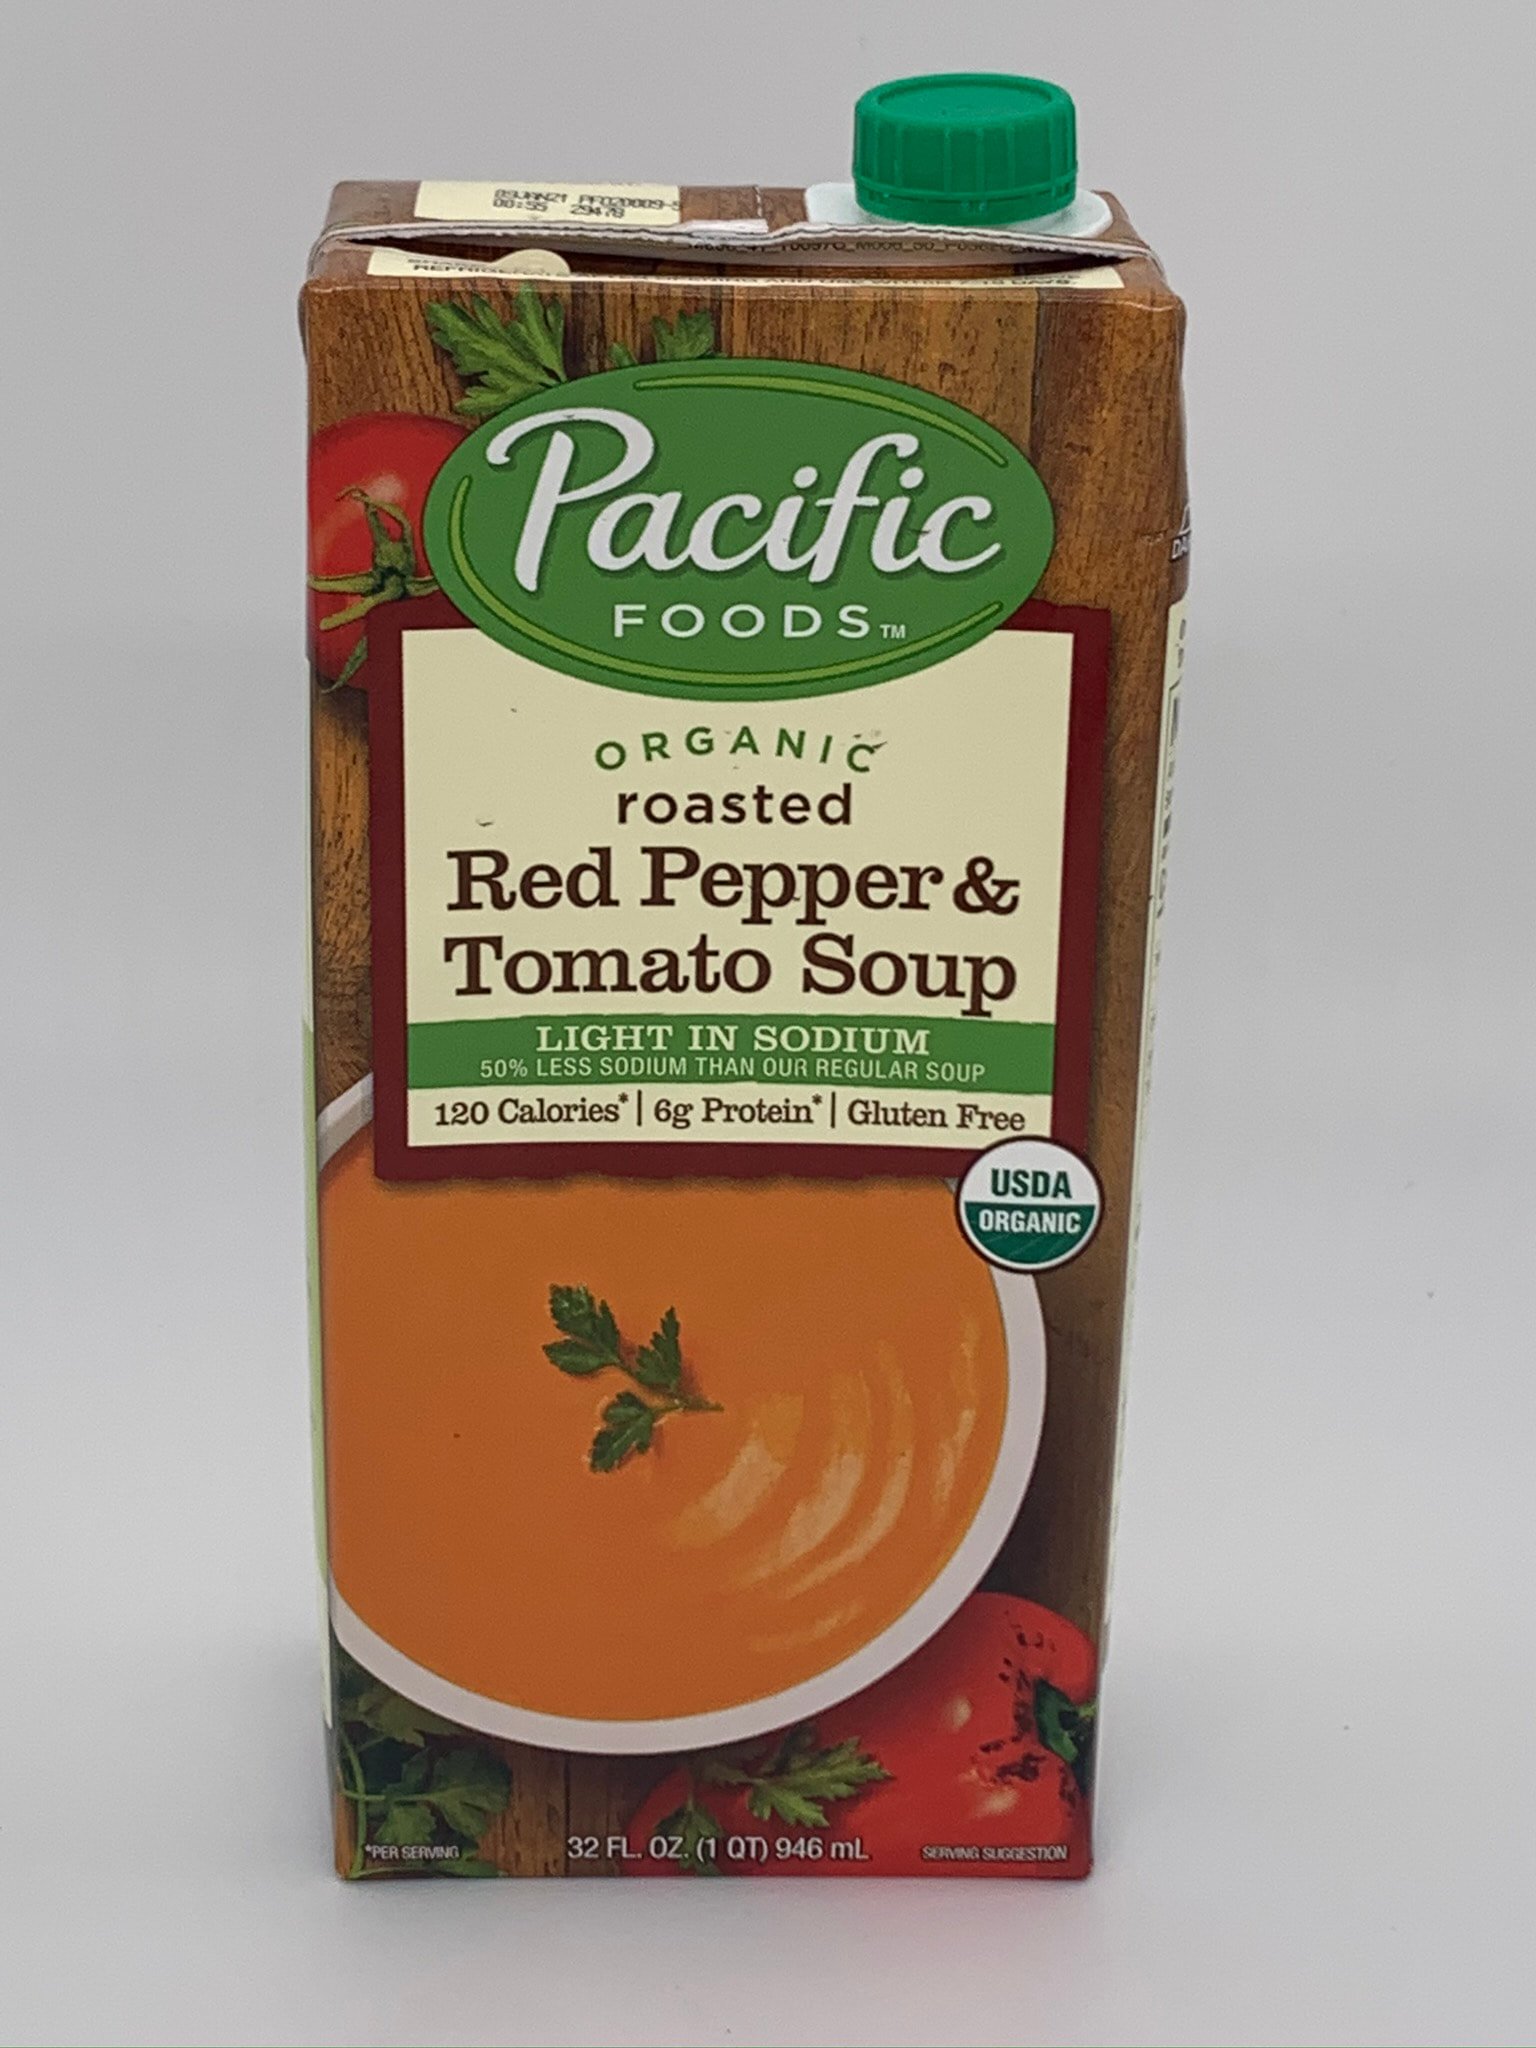 Pacific Foods Organic Roasted Red Pepper and Tomato Soup (32 fl. oz.)